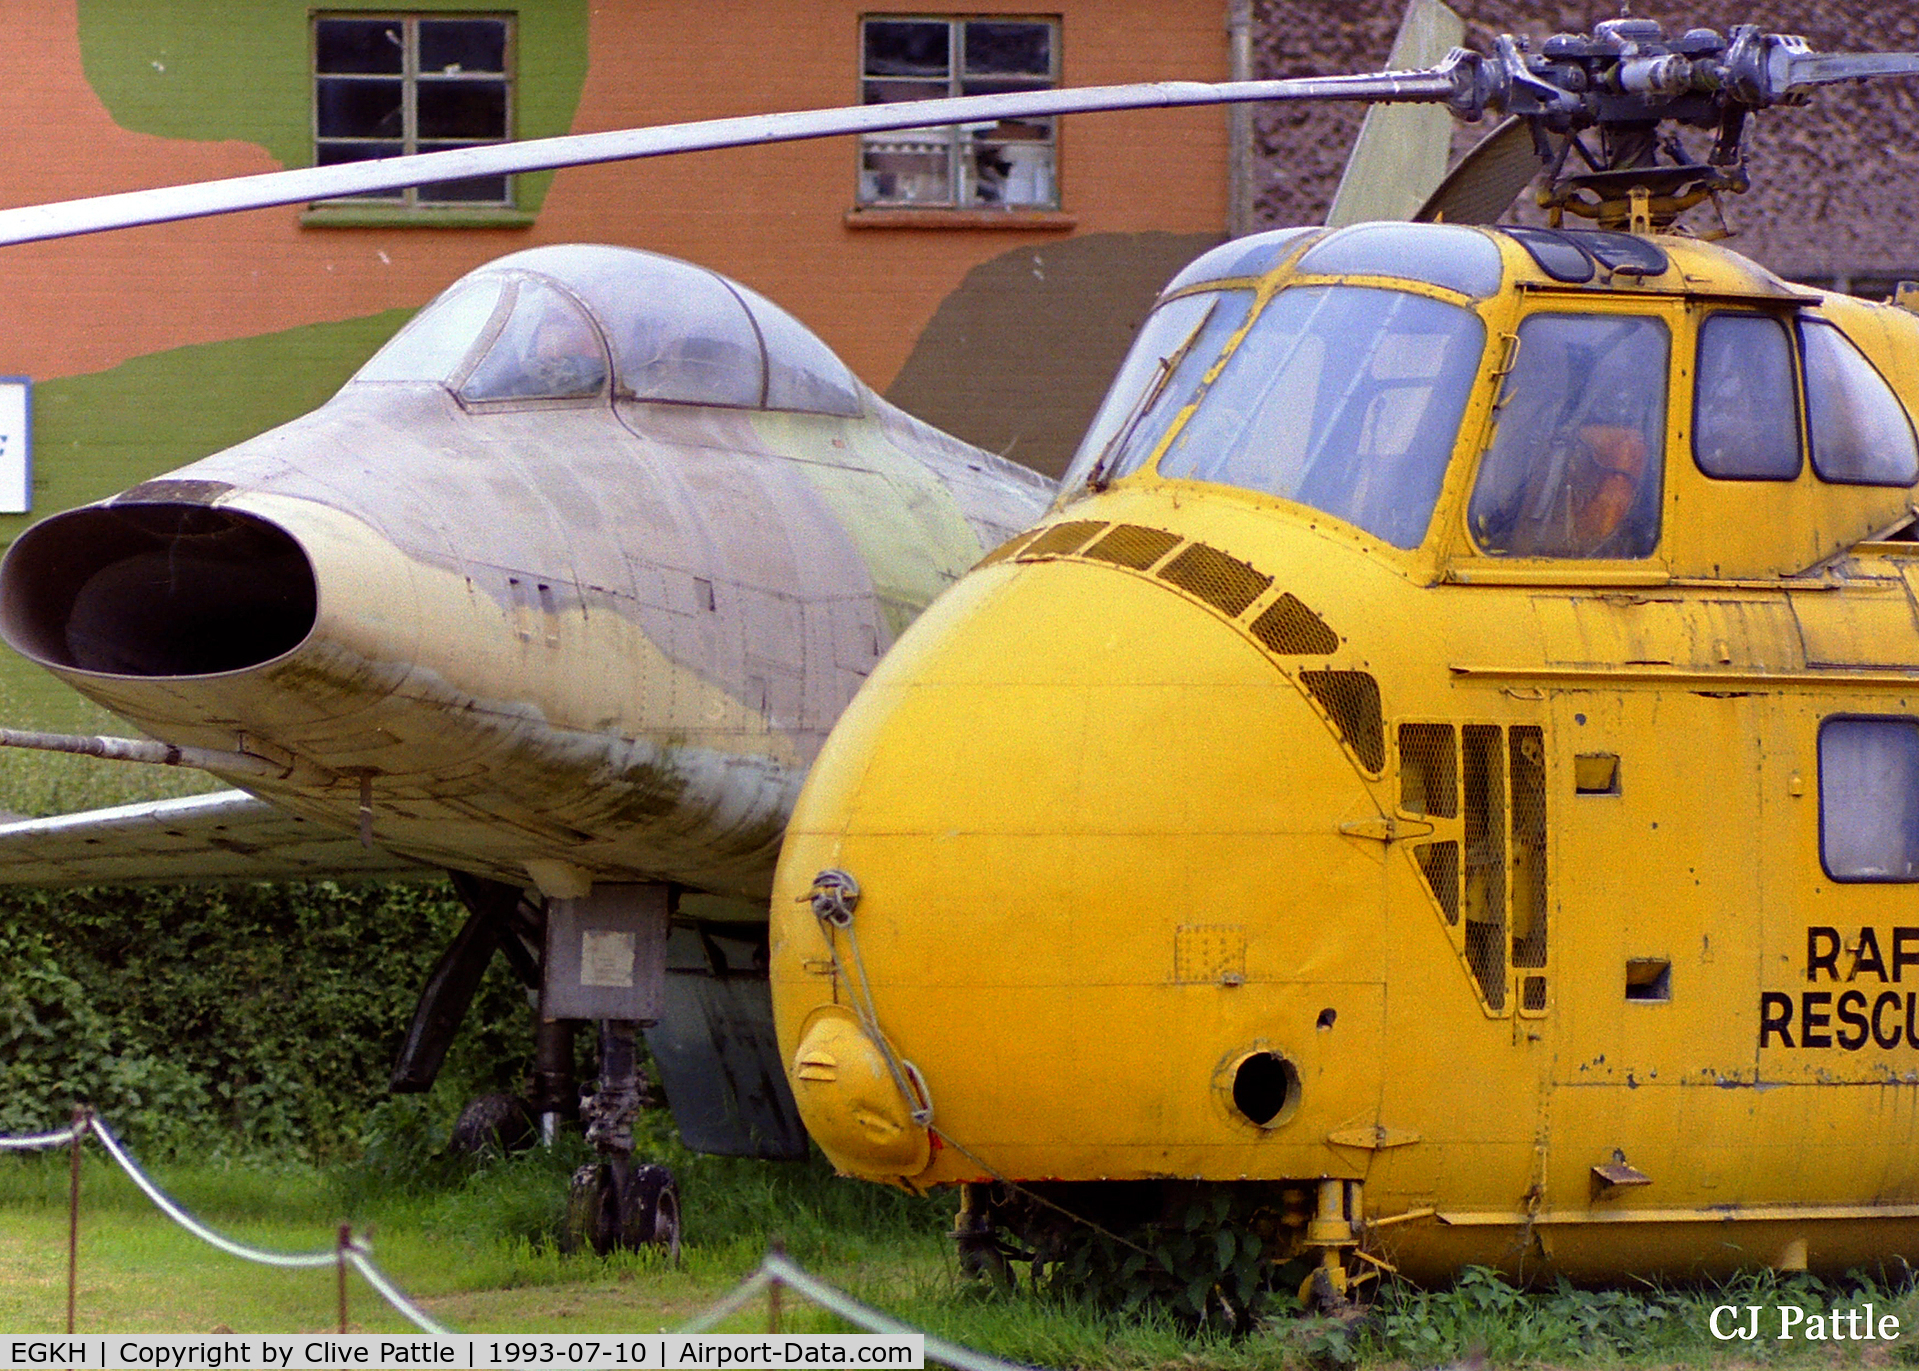 Lashenden/Headcorn Airport, Maidstone, England United Kingdom (EGKH) - A view of two of the external display items at the Lashenden Air Warfare Museum at Headcorn airfield EGKH